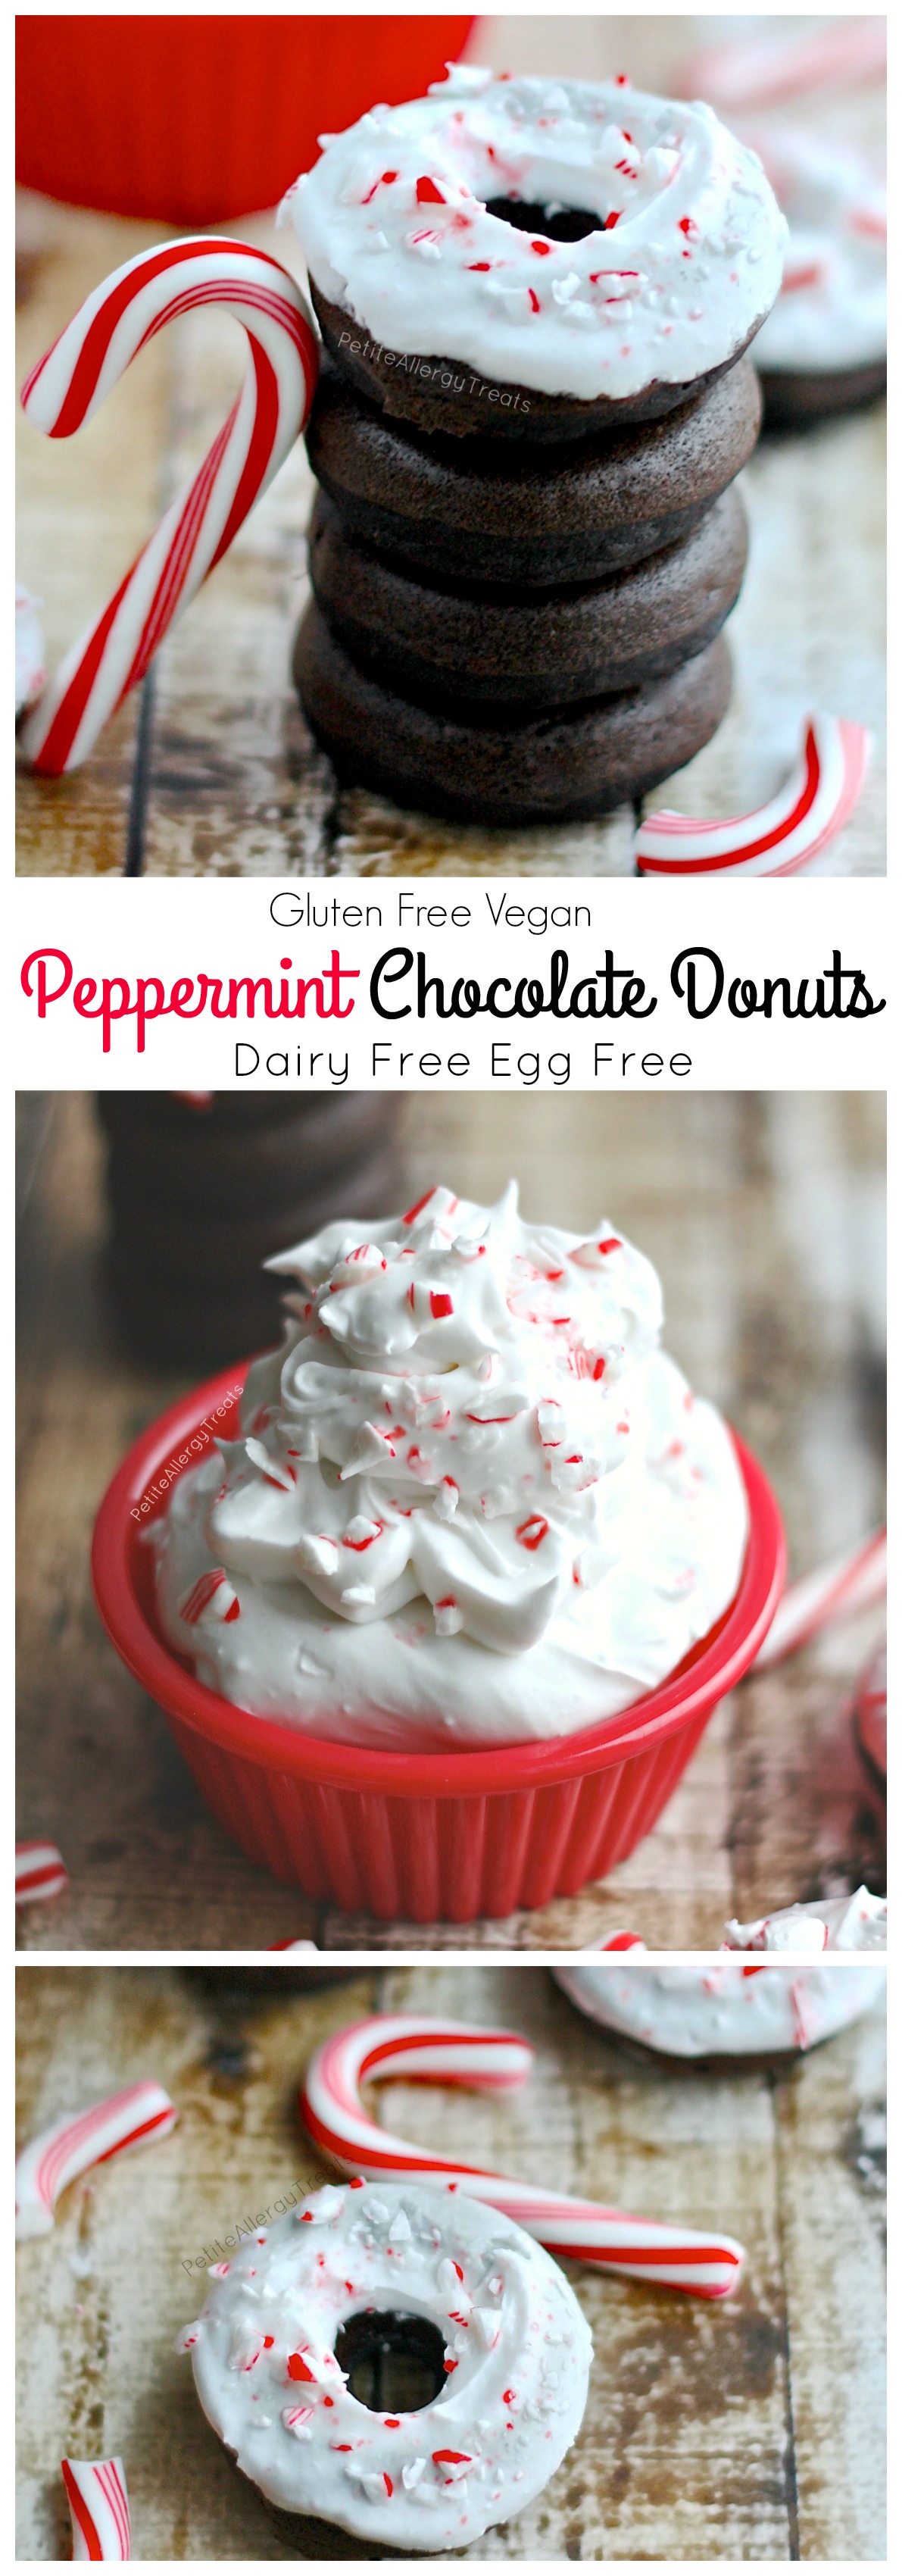 Peppermint Chocolate Donuts (gluten free dairy free vegan) Bright and minty chocolate donuts are great Christmas!